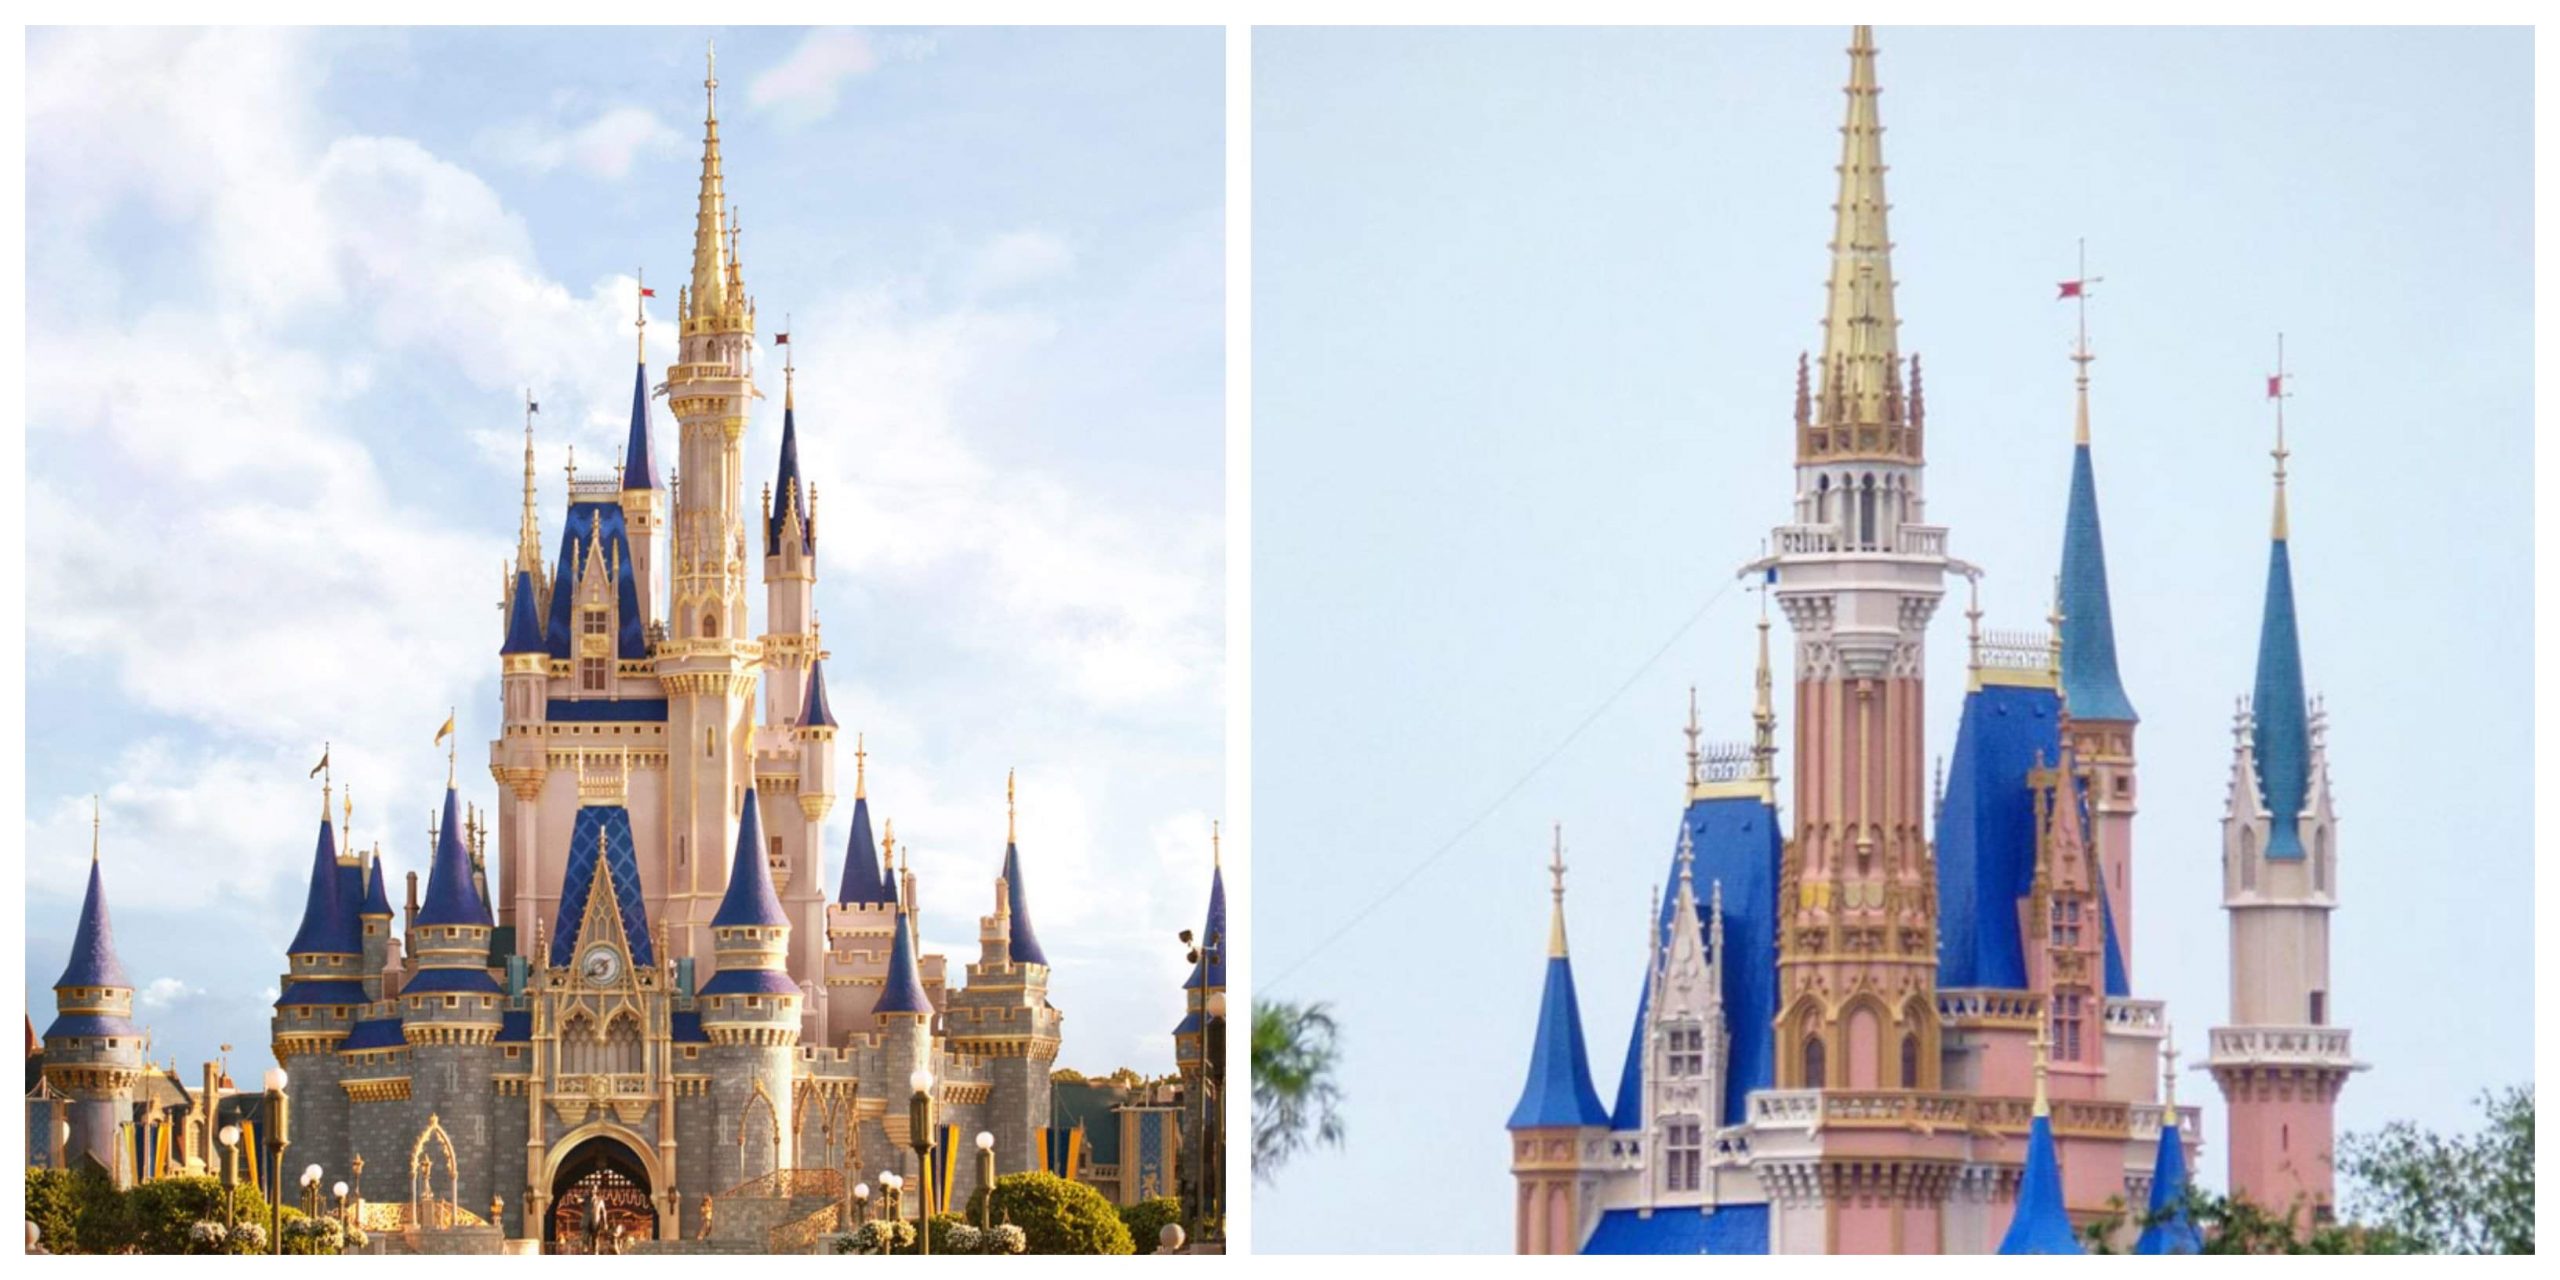 Painting has continued on Cinderella Castle in the Magic Kingdom